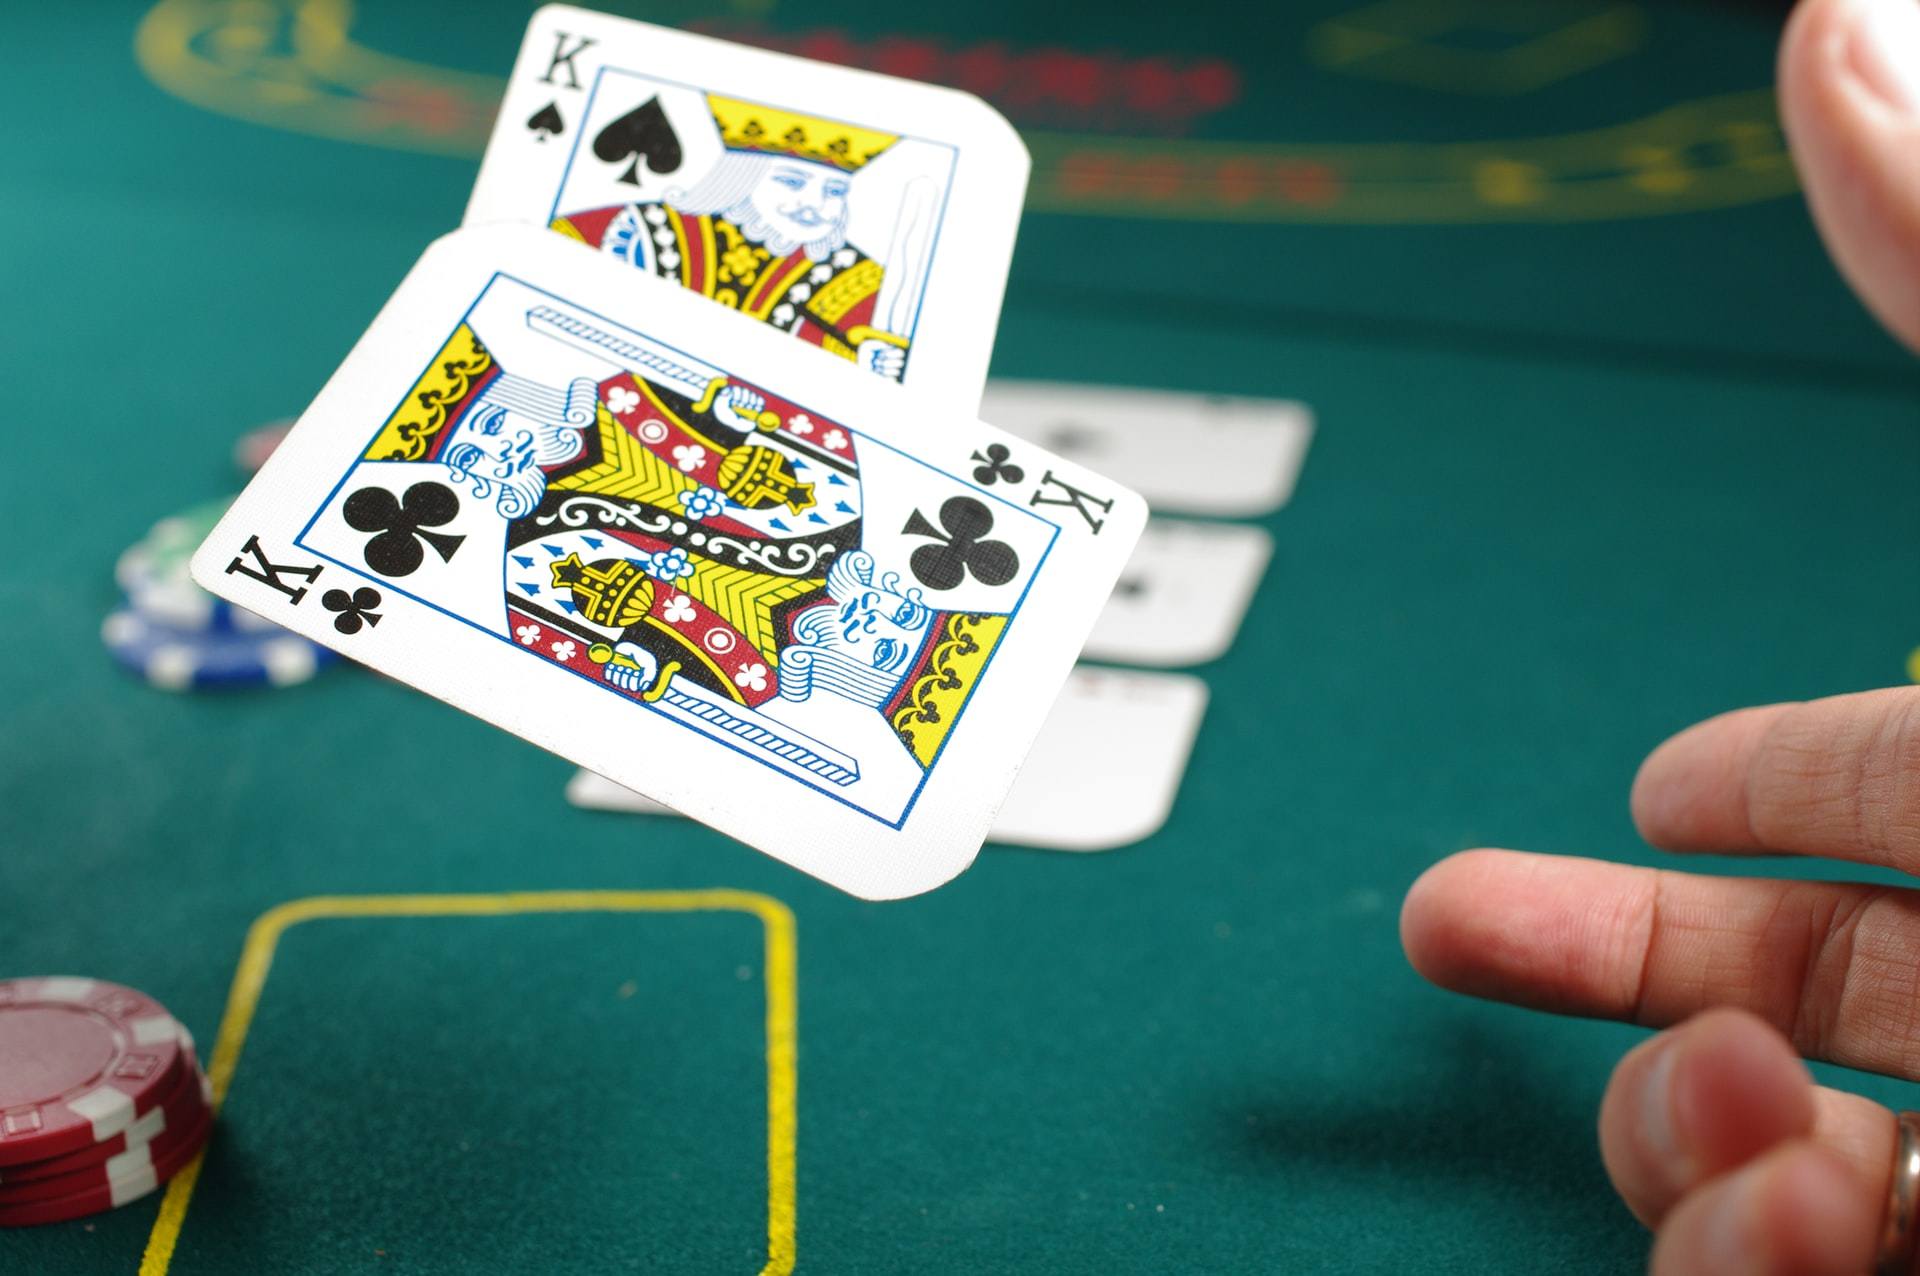 Building Relationships With online casino